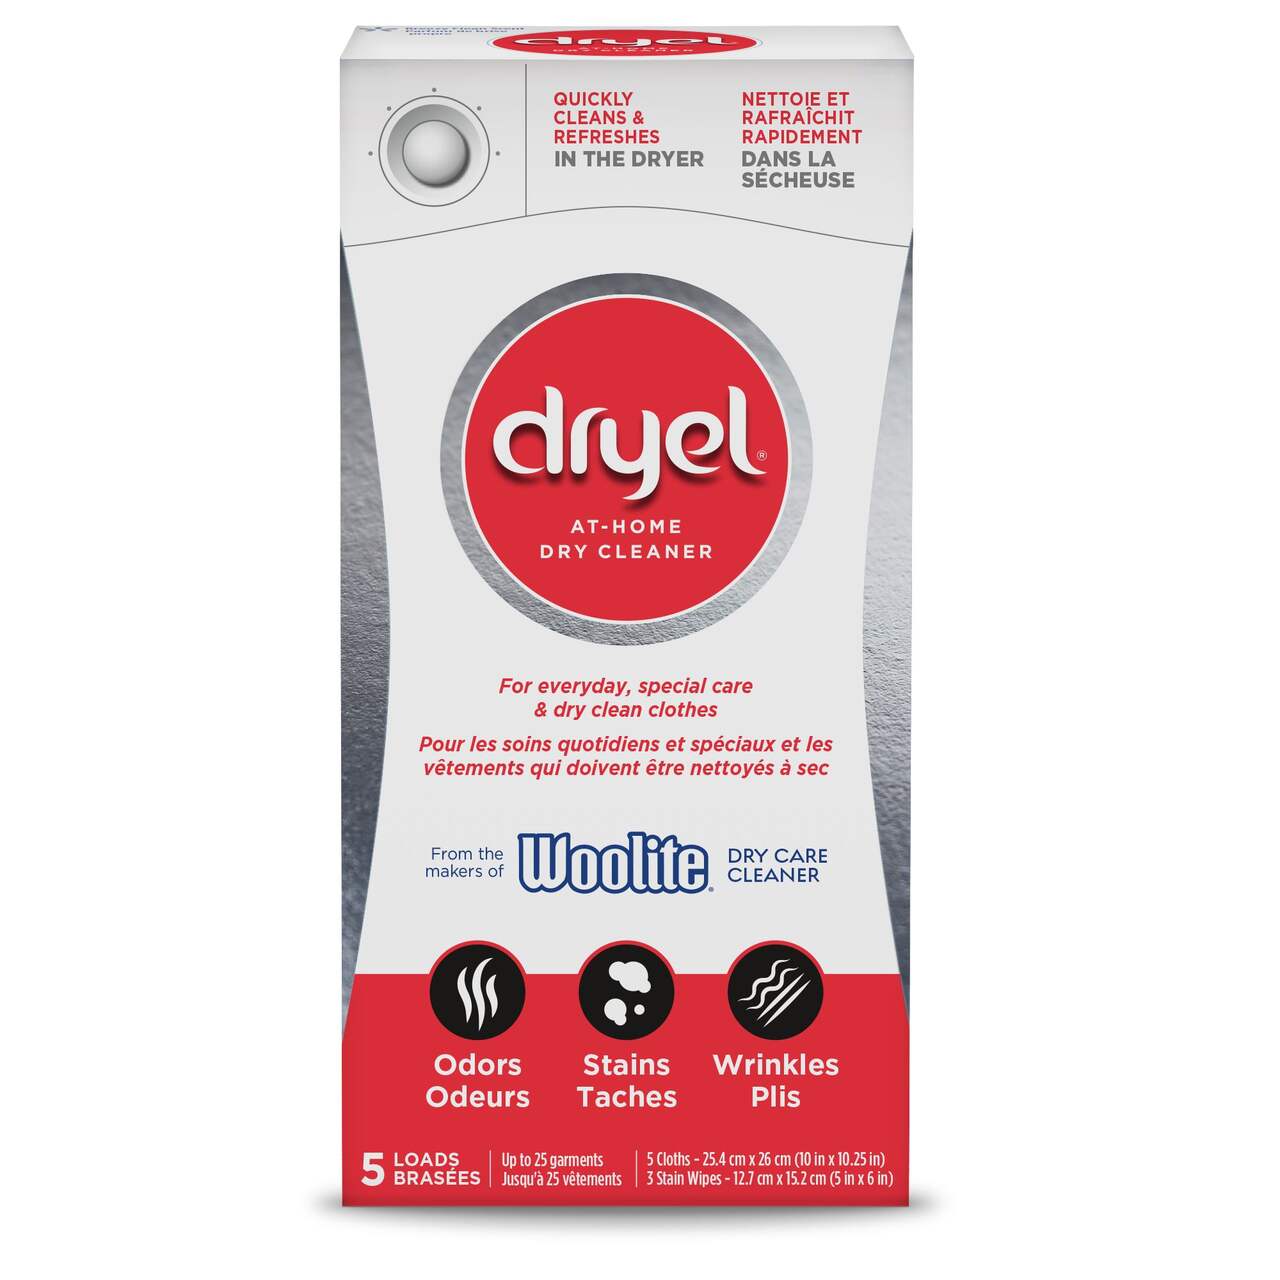 https://media-www.canadiantire.ca/product/living/home-essentials/laundry-hand-dish-cleaning-solutions/0532948/woolite-dry-cleaner-s-secret-6-cloths-4e26c8bb-7ce2-4694-9d2e-28ffe5d4d2b4-jpgrendition.jpg?imdensity=1&imwidth=1244&impolicy=mZoom